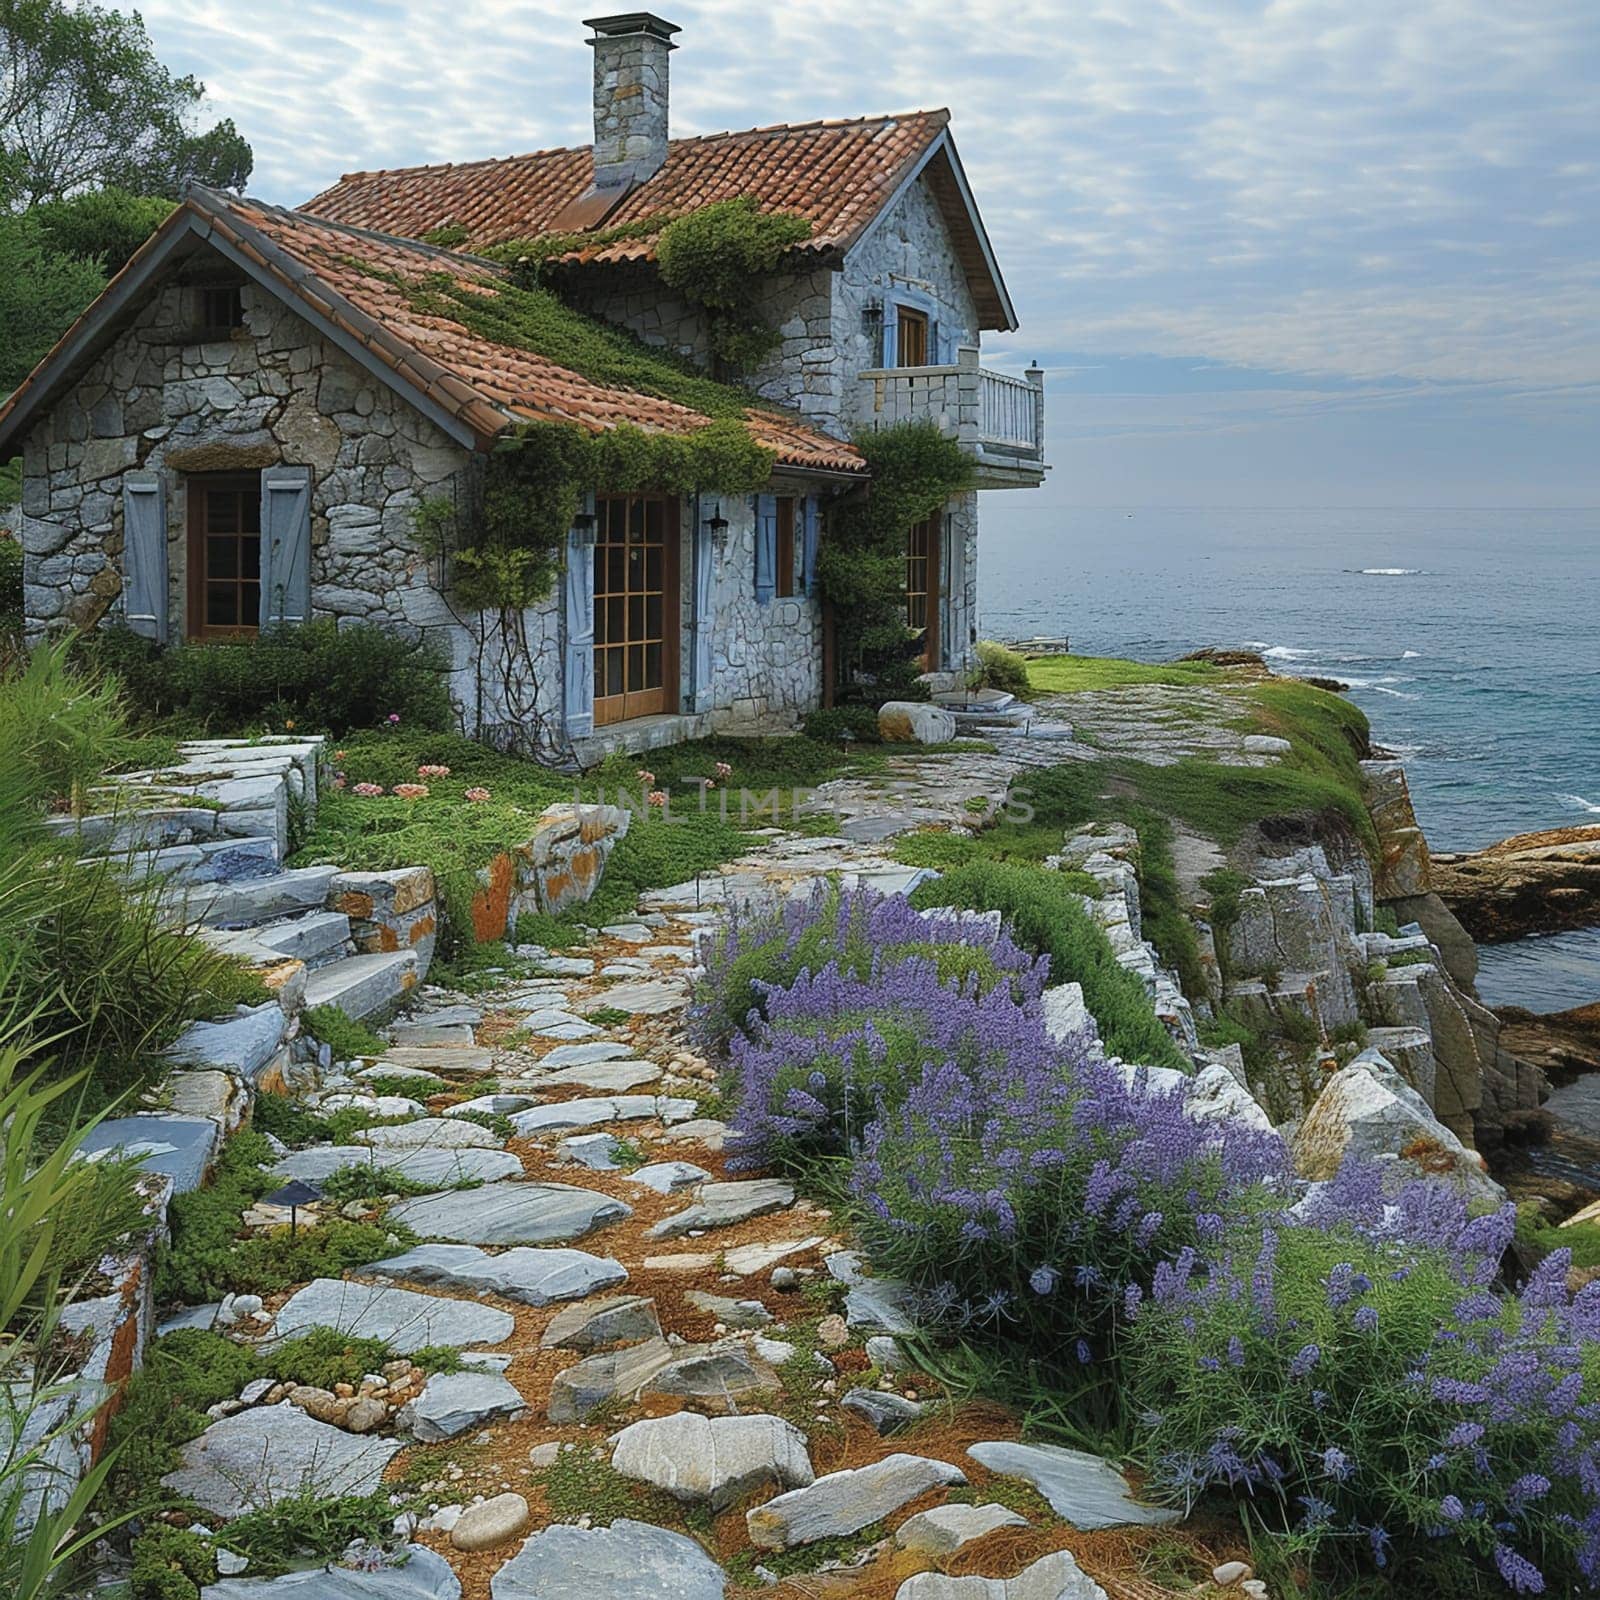 Charming Coastal Cottage with Stone Path to the Beach, coastal cottage charm for seaside serenity.